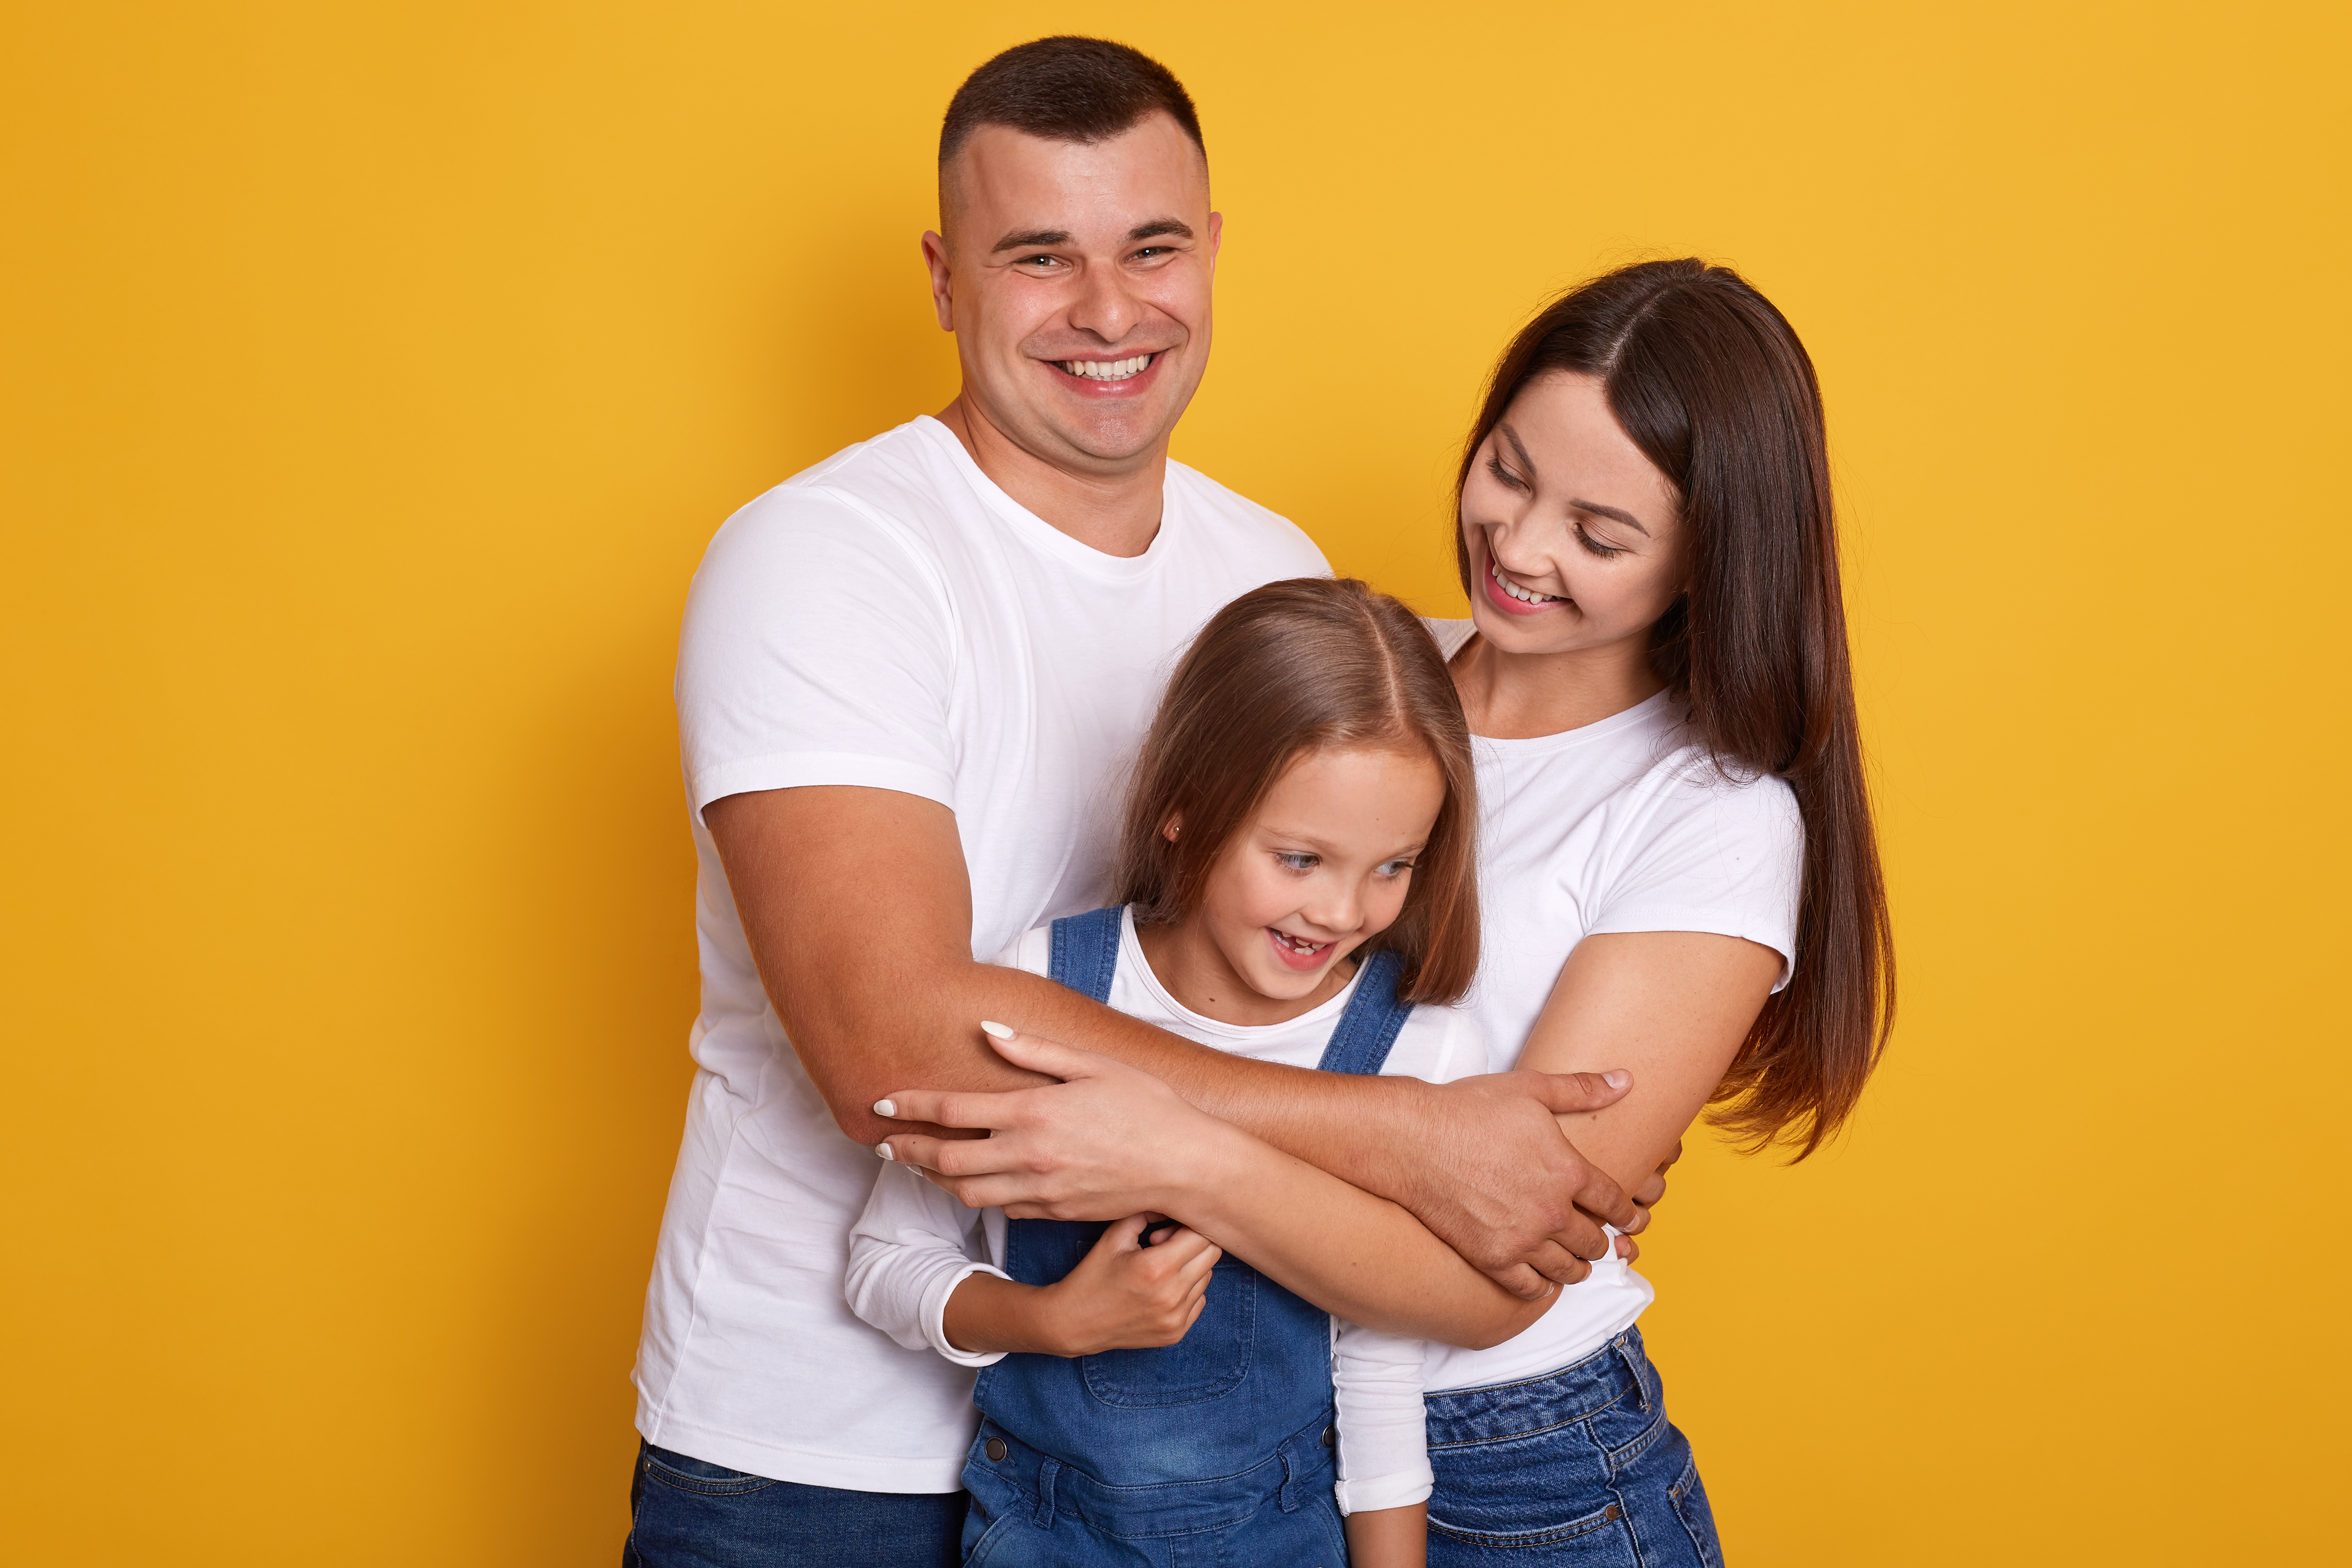 Mom, dad, and daughter all wearing white tshirts and jeans standing against a yellow background.